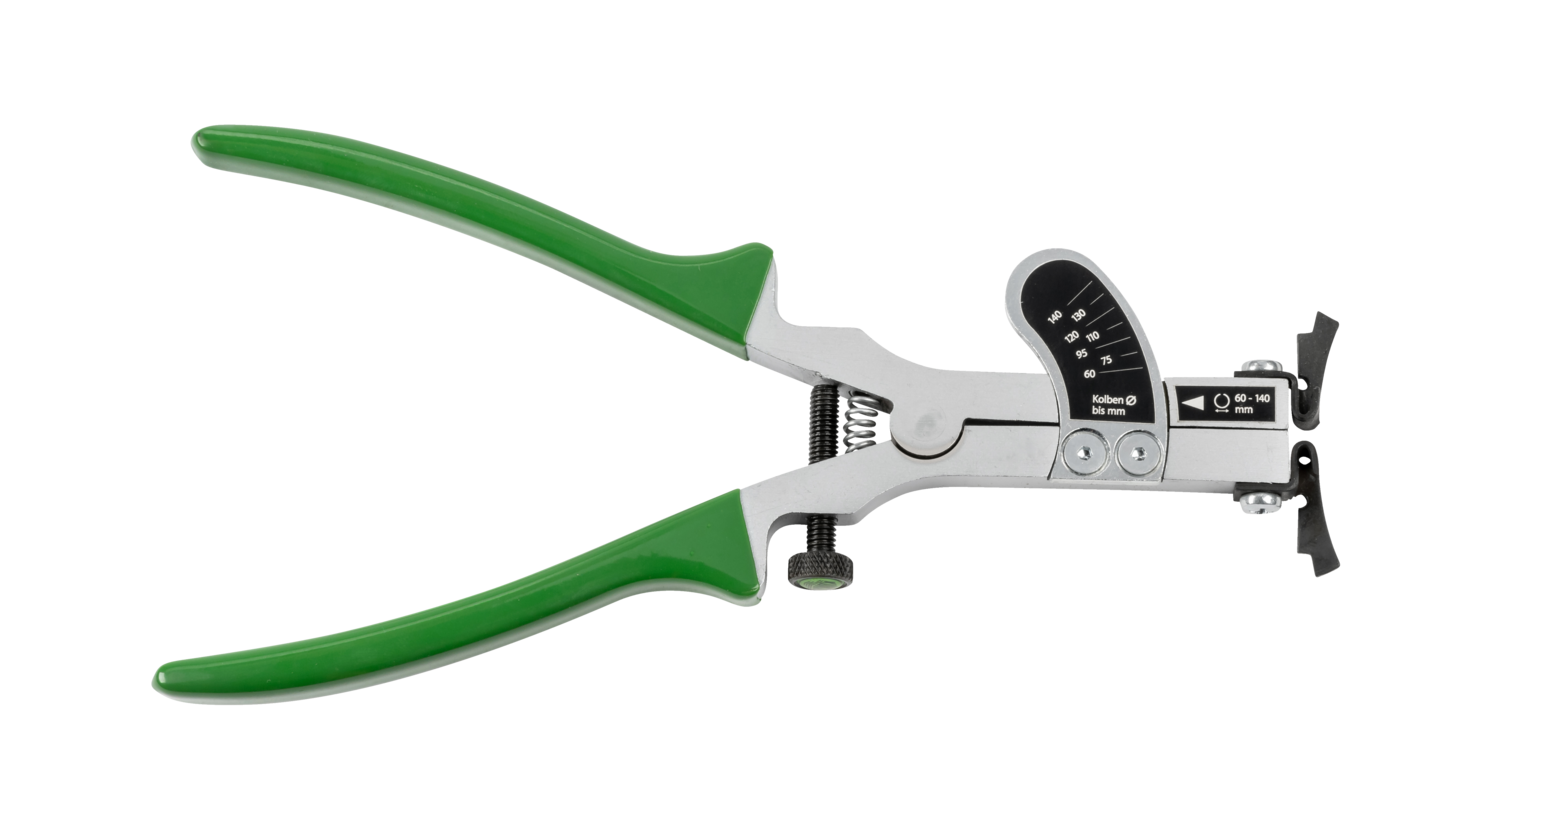 The Universal Piston Ring Placement Pliers 101-3 for efficient assembly of piston rings